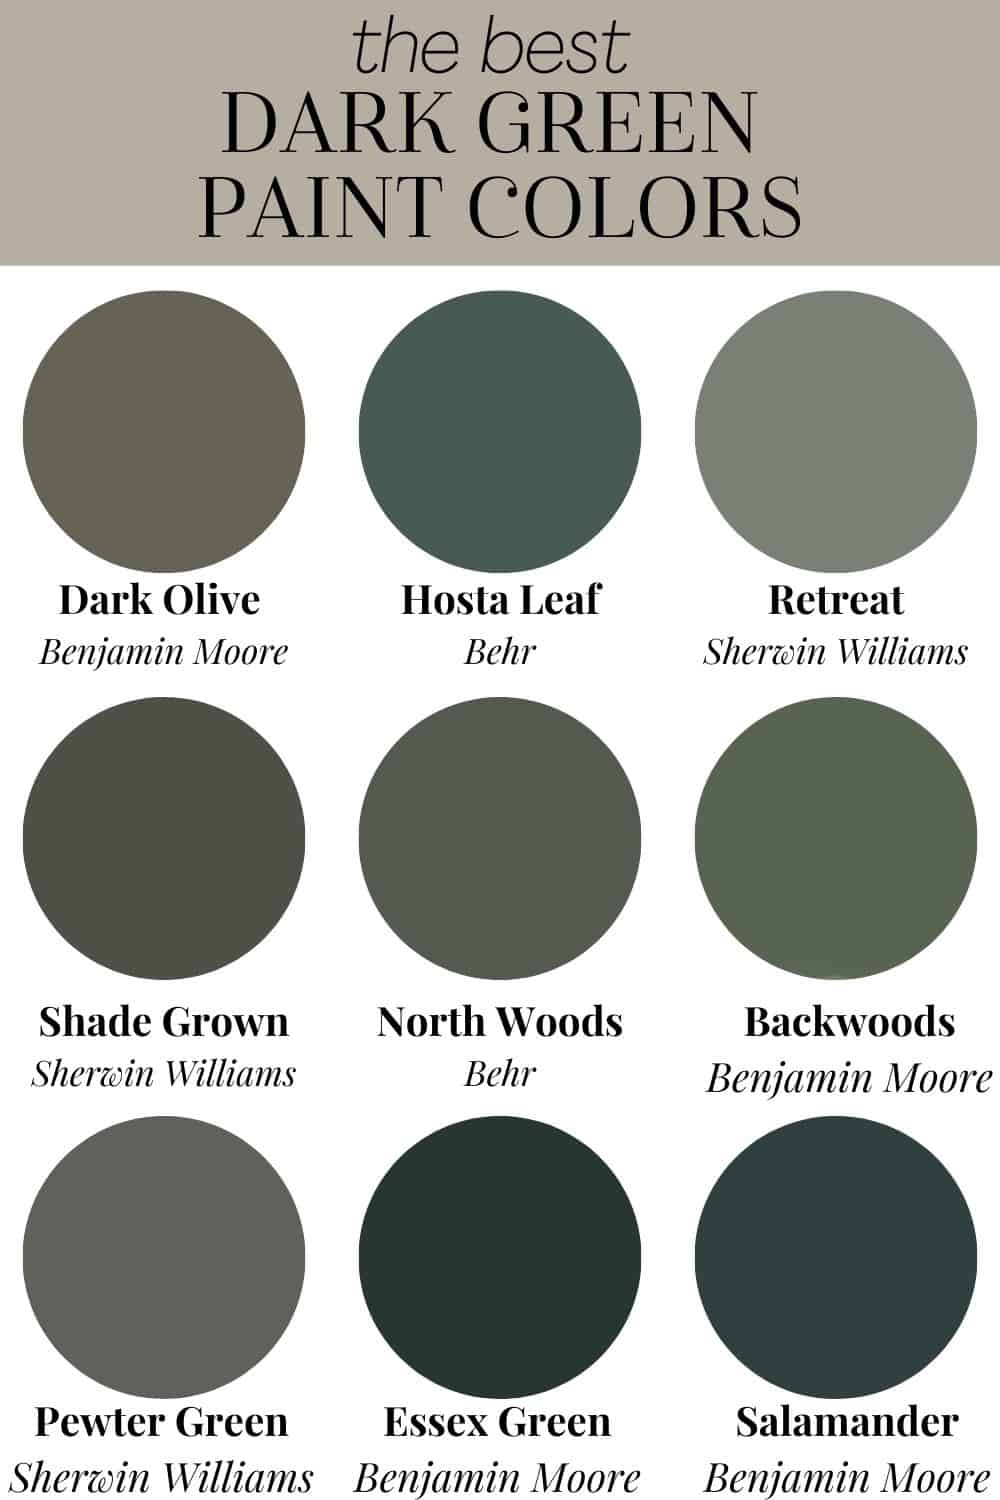 The Best Dark Paint Colors {And How to Use Them!} Project Isabella